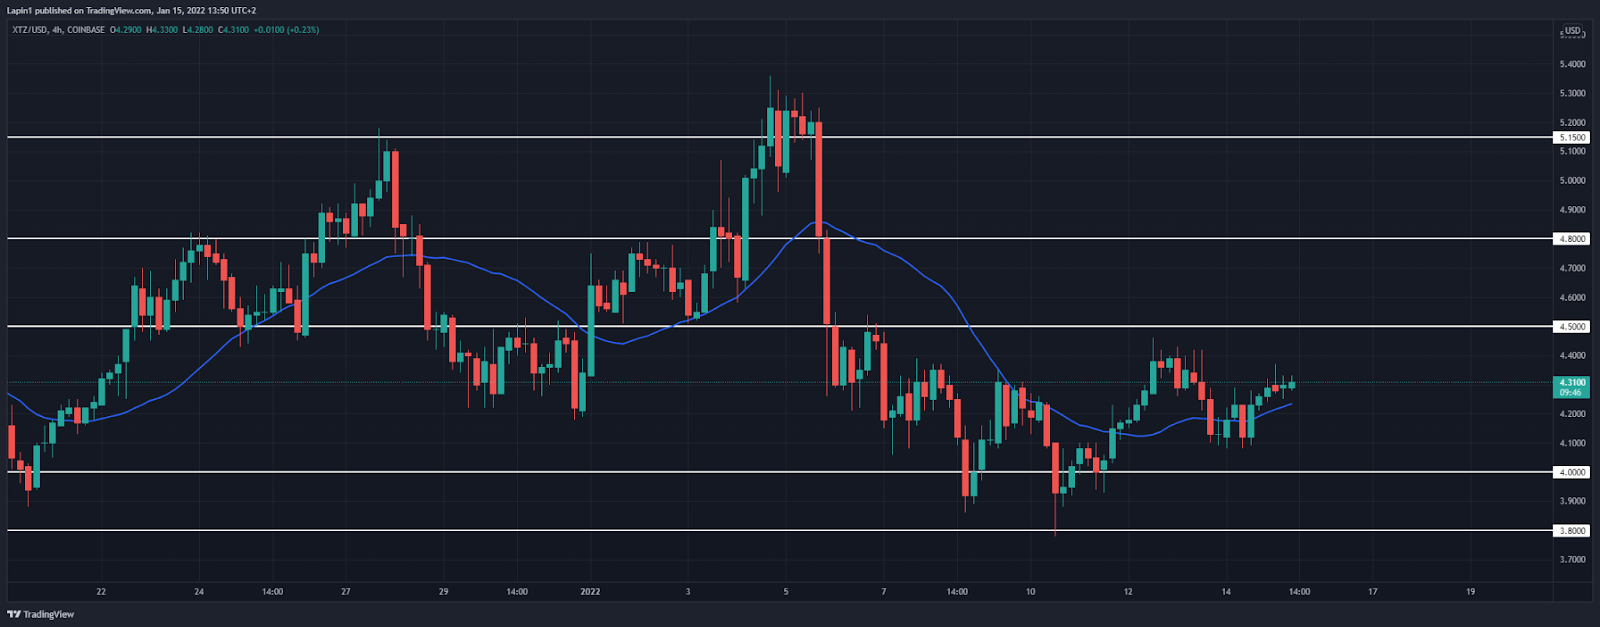 Tezos Price Analysis: XTZ rejects upside around $4.35, more retracement to follow?